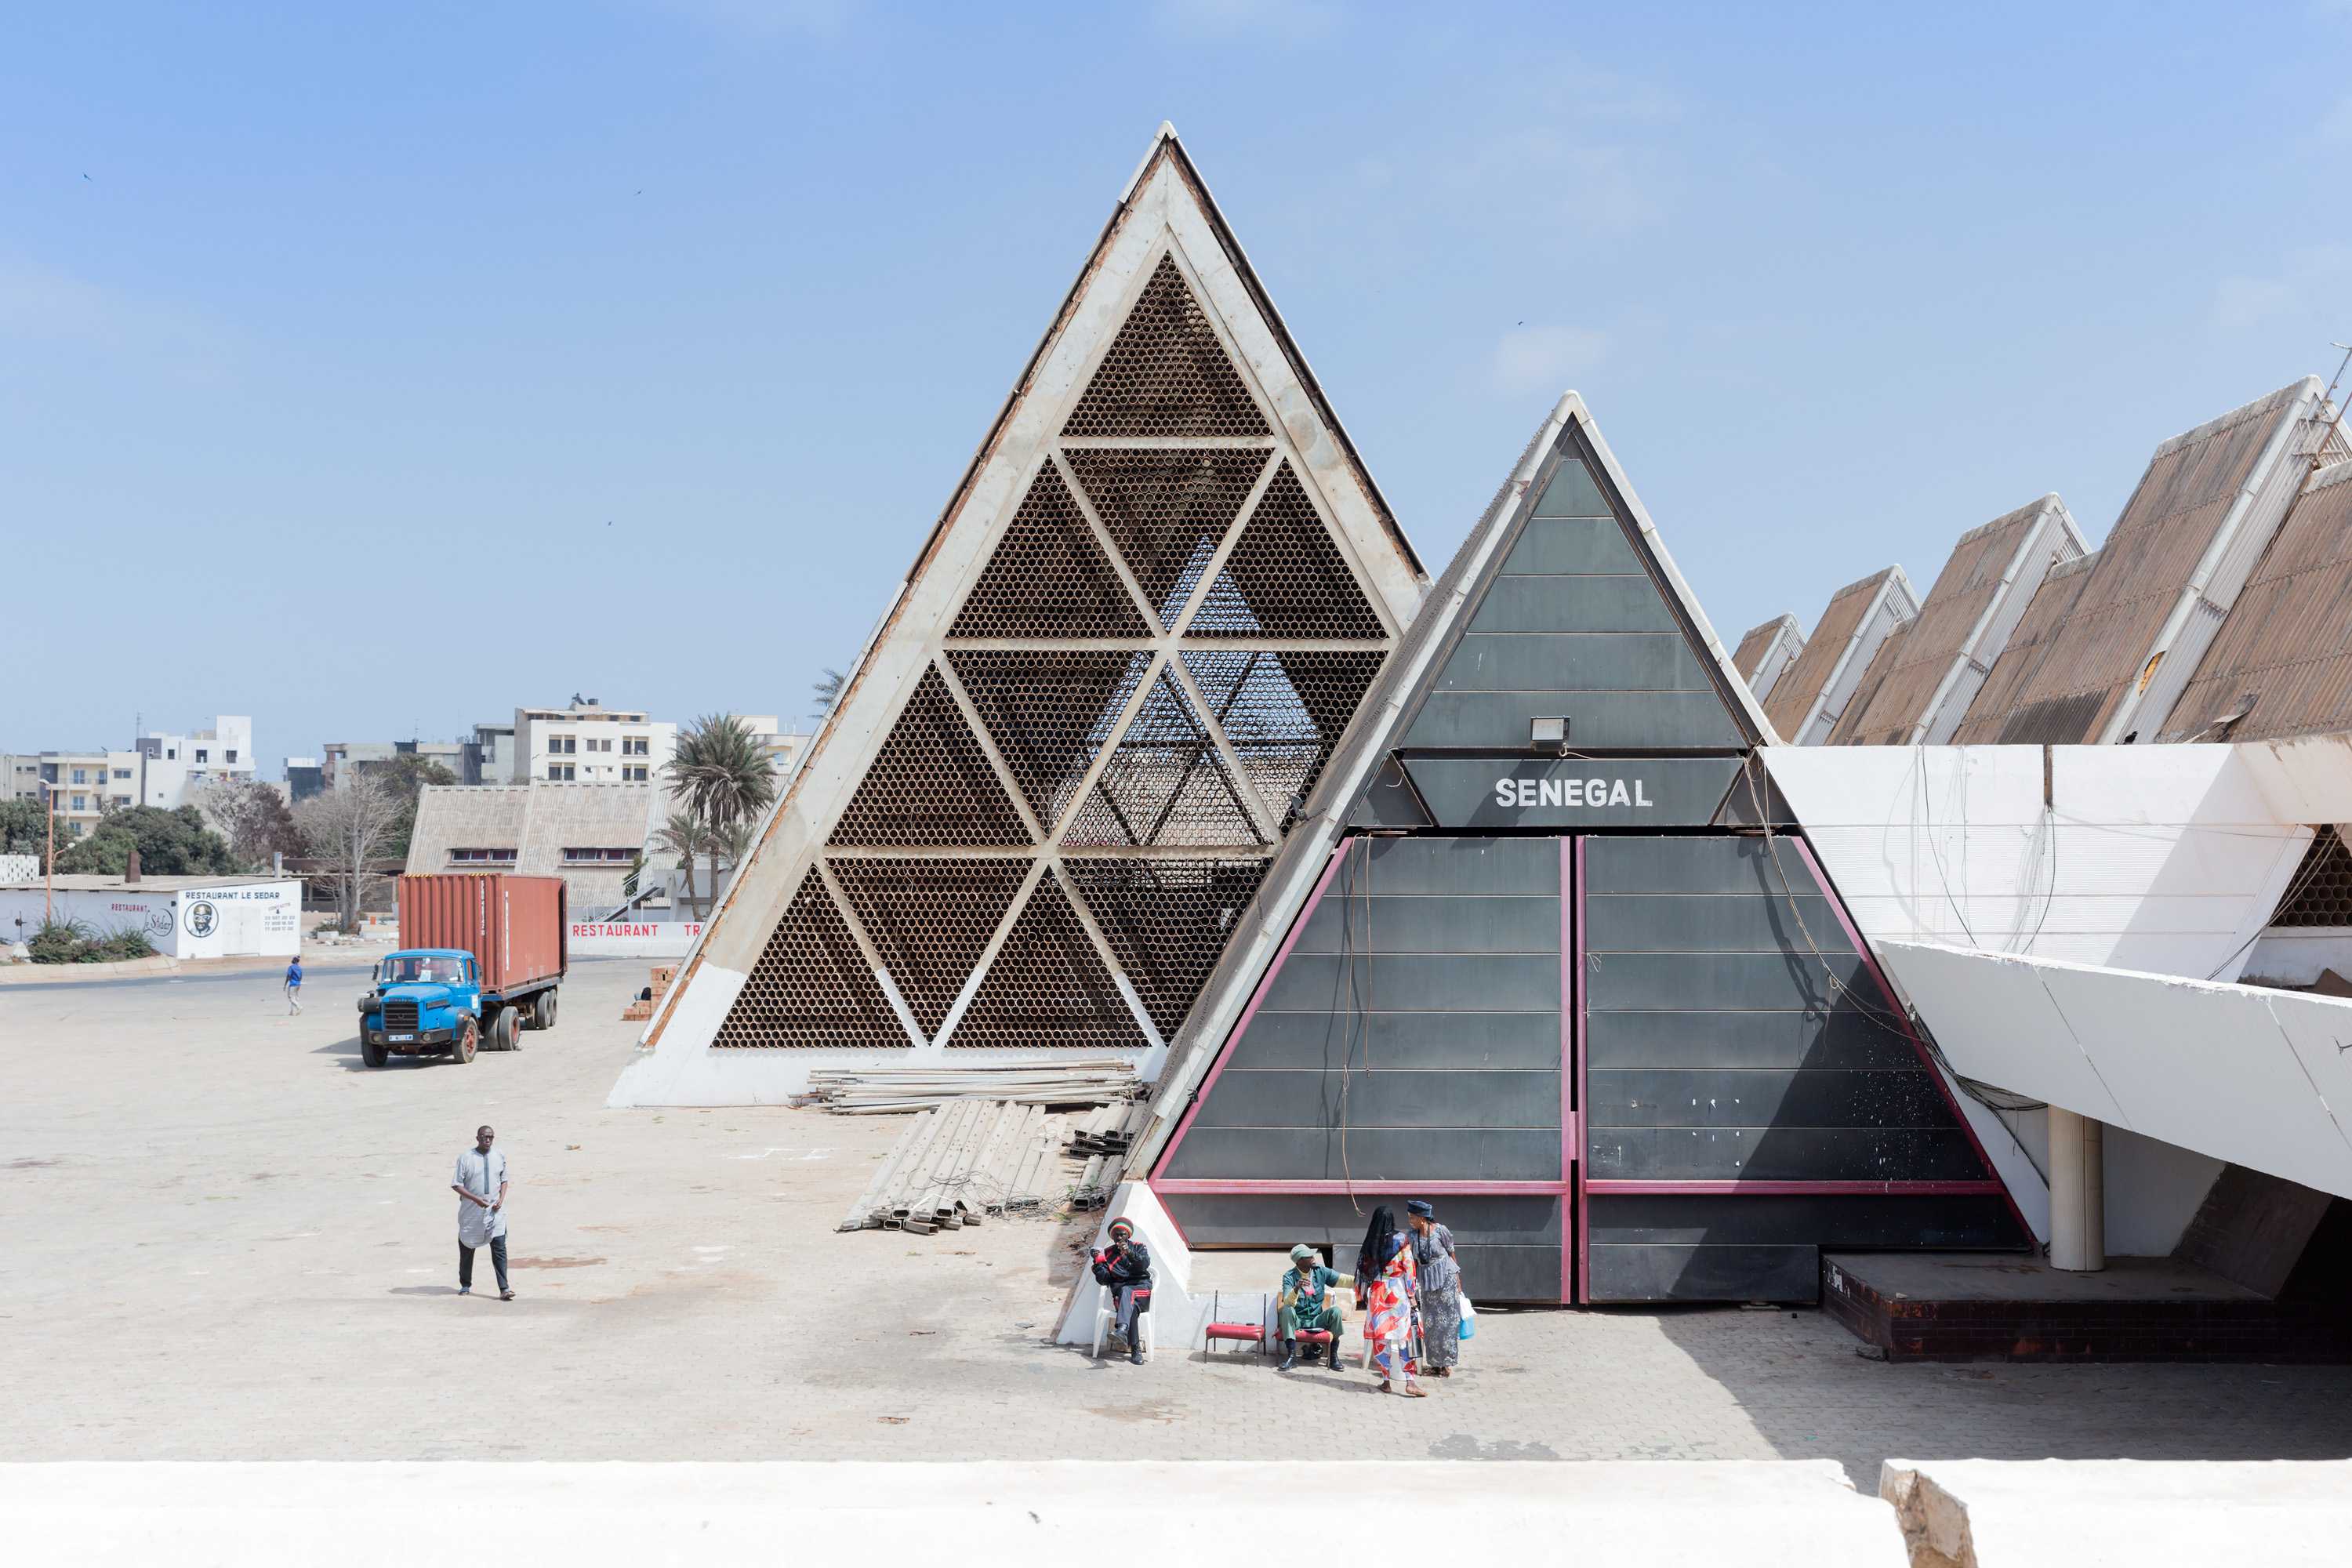 The FIDAK exhibition centre has two a-framed concrete triangles. A few people stand outside of each building.